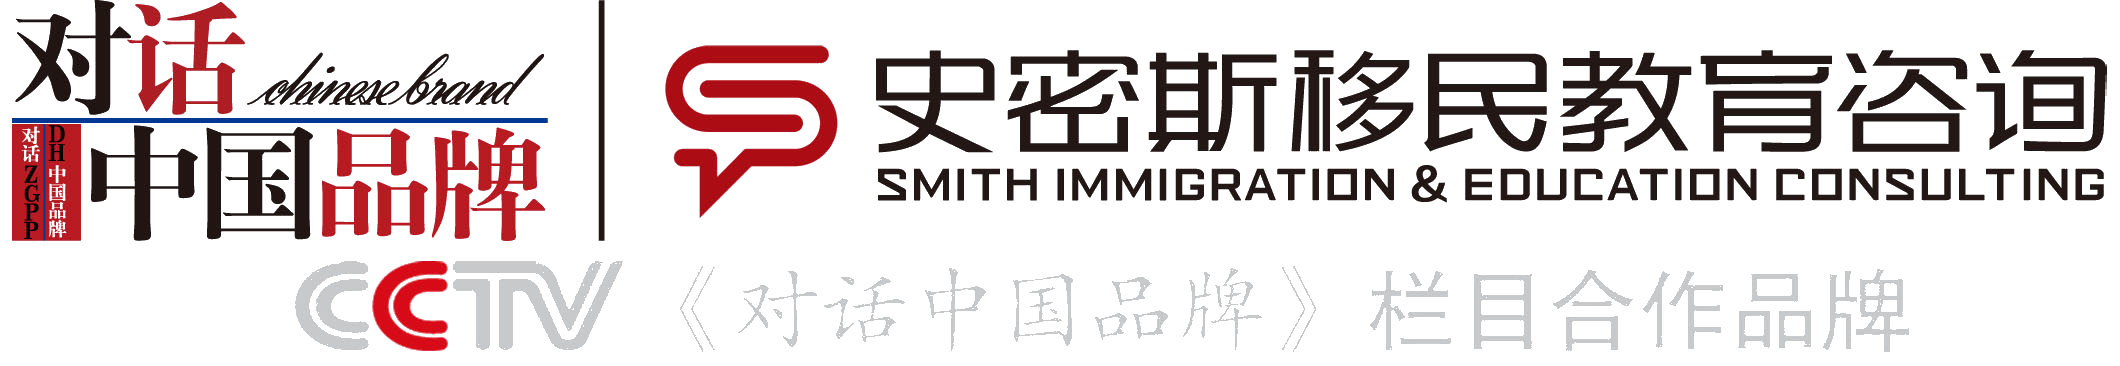 Smith Immigration & Education Consulting - Wuhan